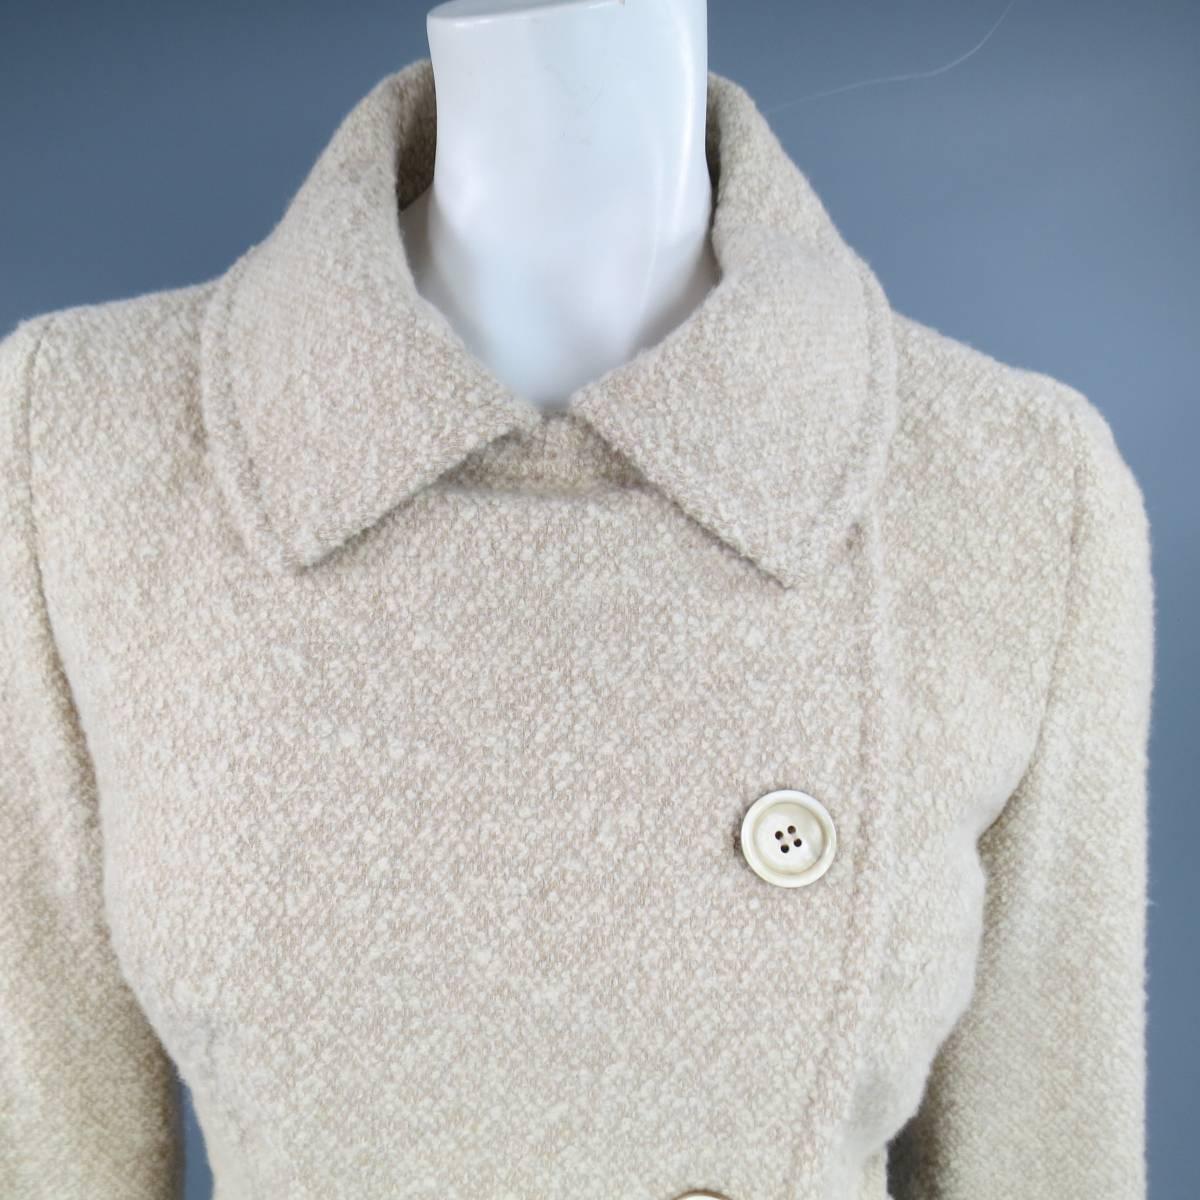 This lovely MAX MARA jacket comes in a light oatmeal beige cashmere blend textured tweed and features a pointed collar, double patch pockets, and asymmetrical button up closure. Made in Italy.
 
Excellent Pre-Owned Condition.
Marked: US 8
